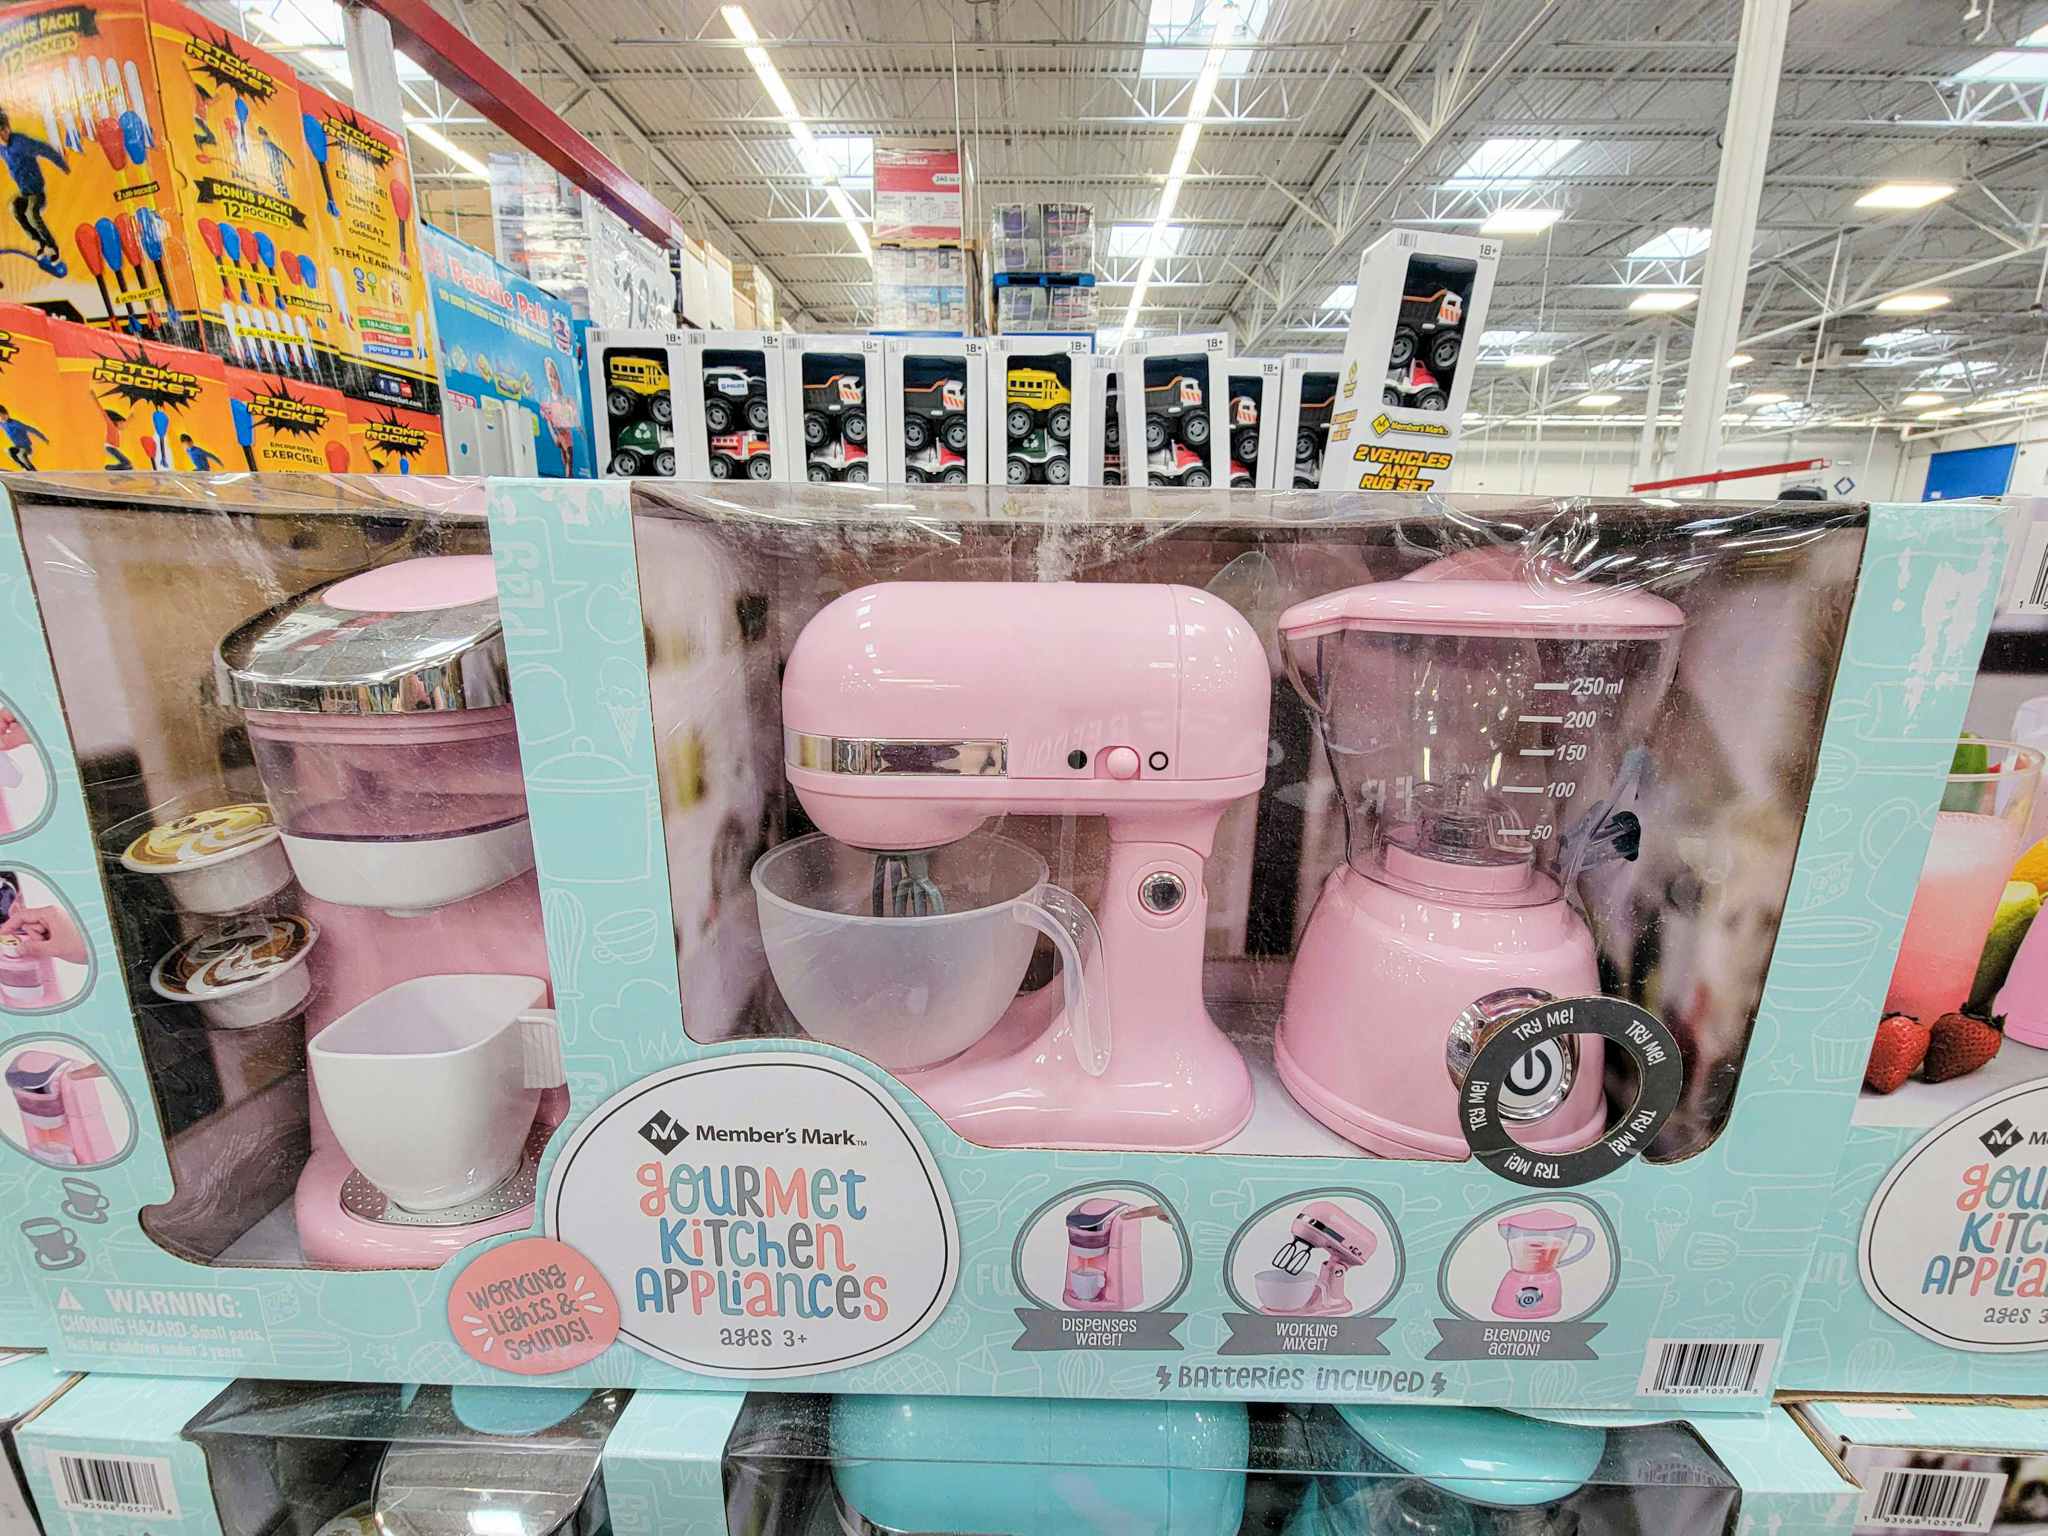 a set of pink toy kitchen appliances including a mixer, blender, and coffee maker